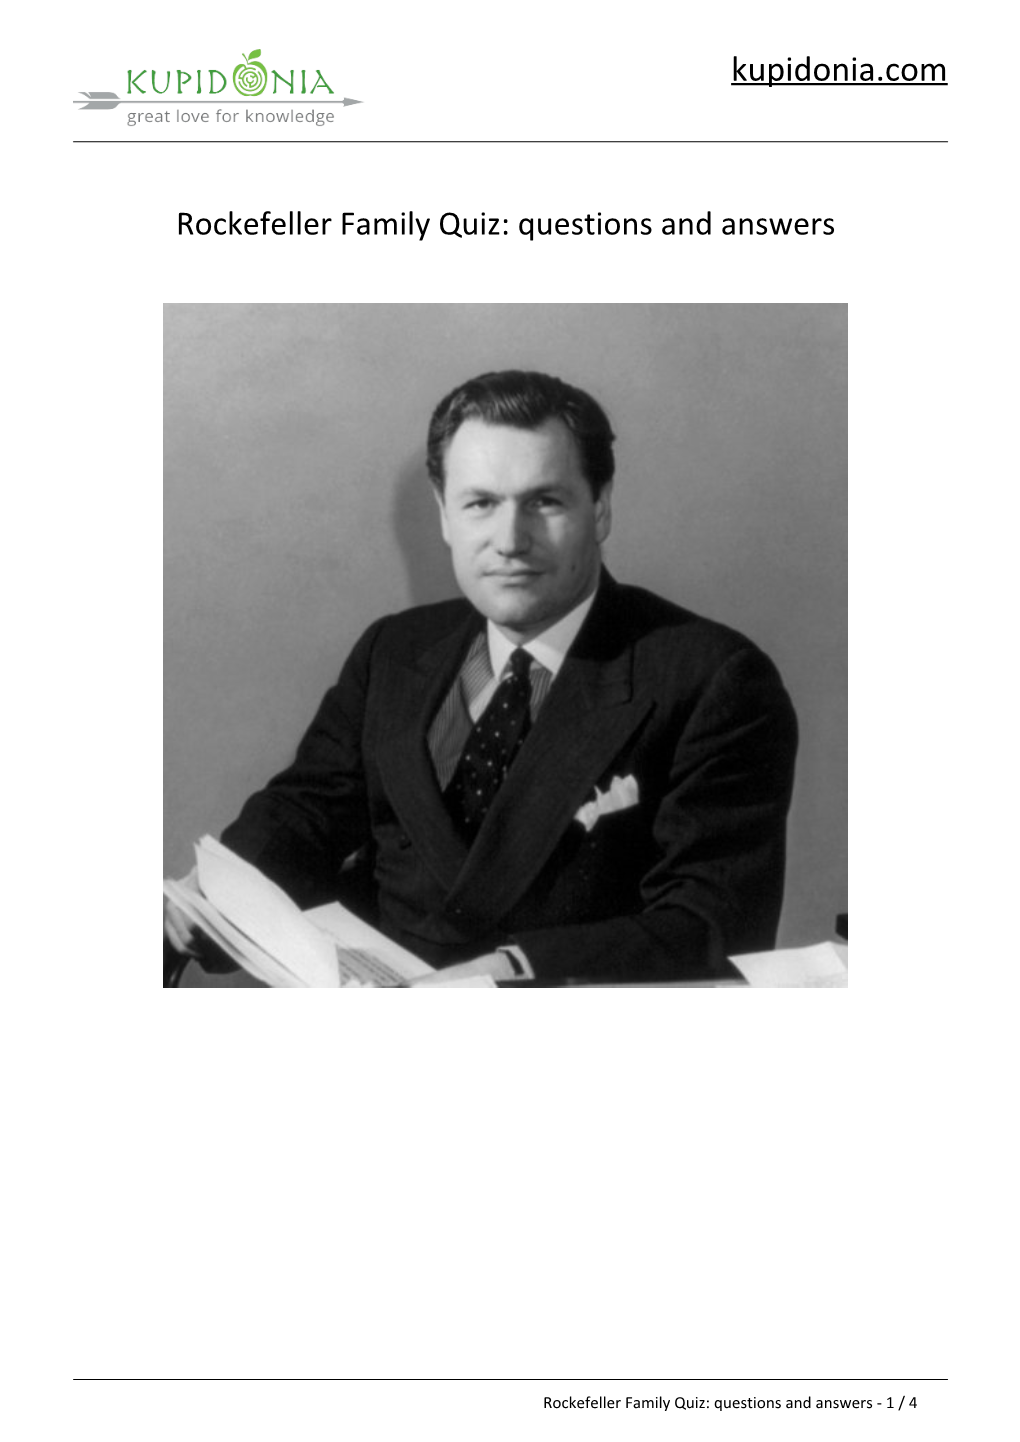 Rockefeller Family Quiz: Questions and Answers